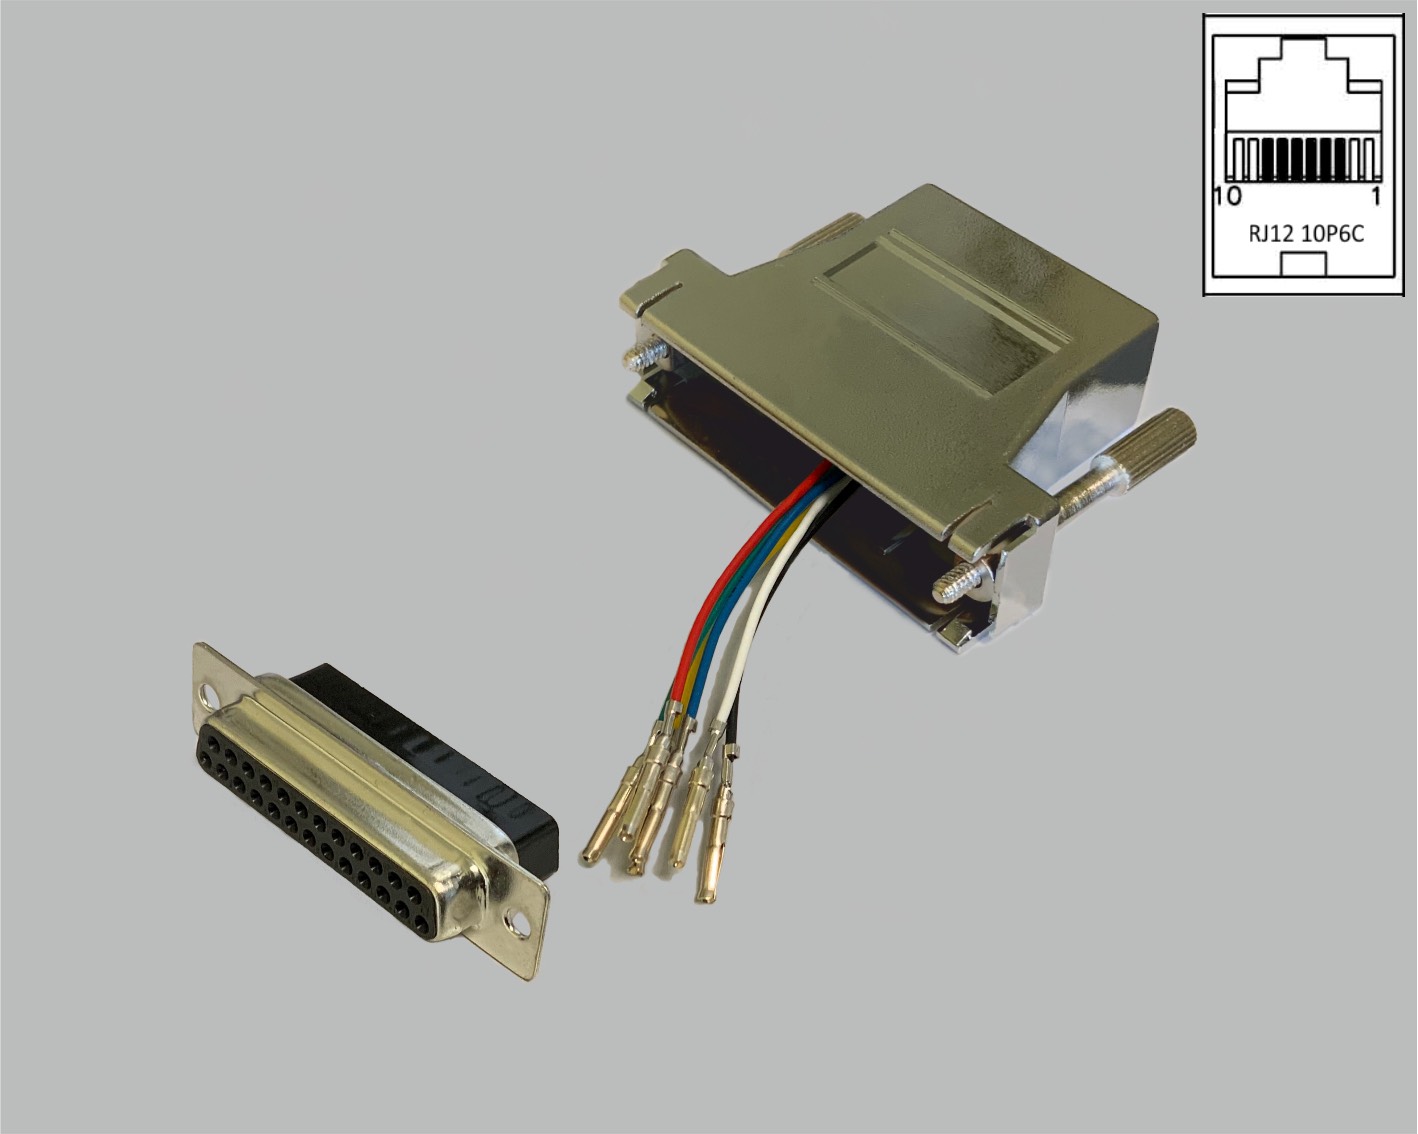 D-Sub/RJ adapter, freely configurable, D-Sub female connector 25-pin to RJ12 (10P6C) female connector, metallised